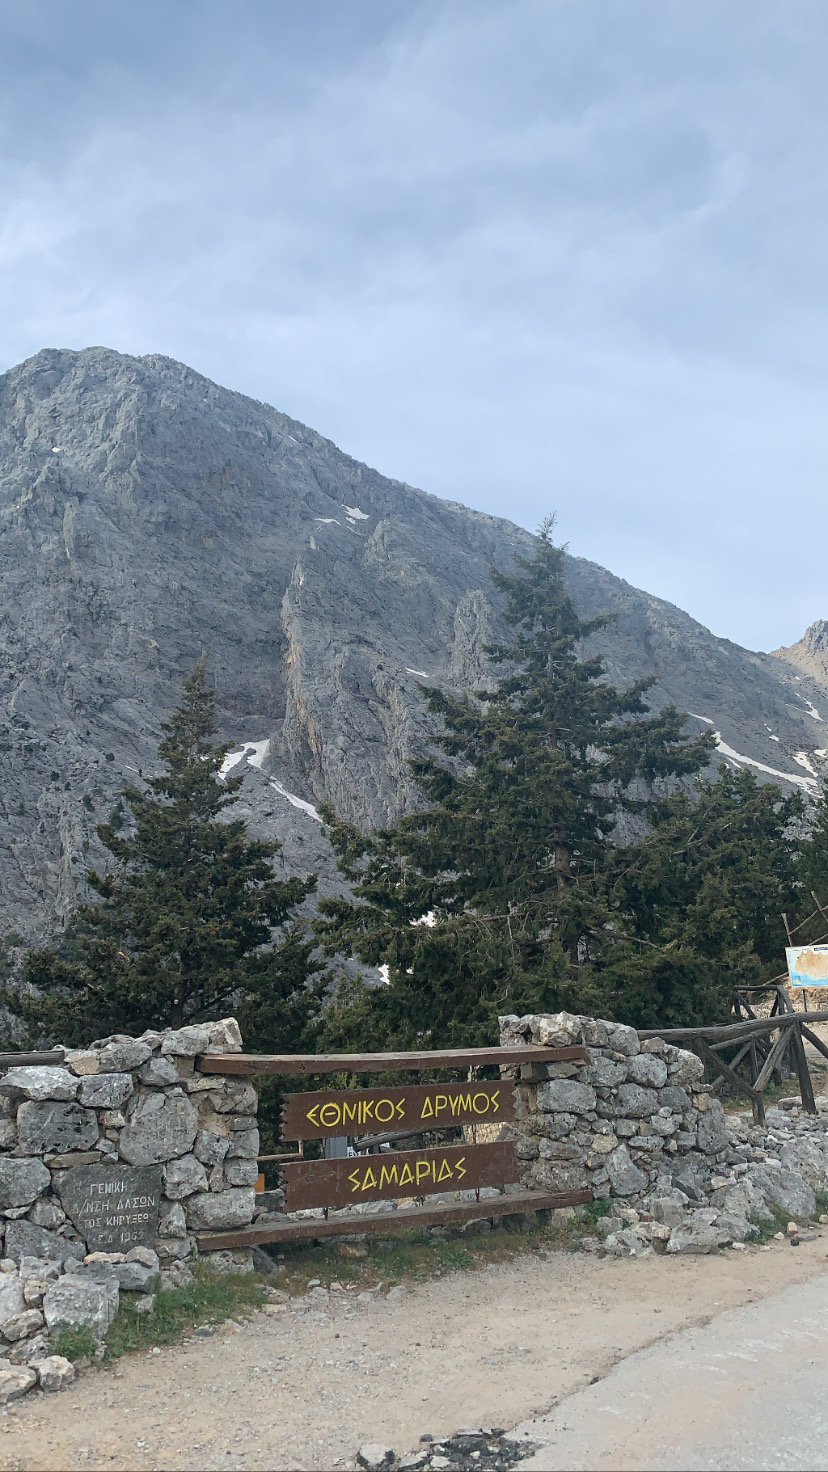 The entrance to the Samaria gorge, with a sign written in Greek in the foreground